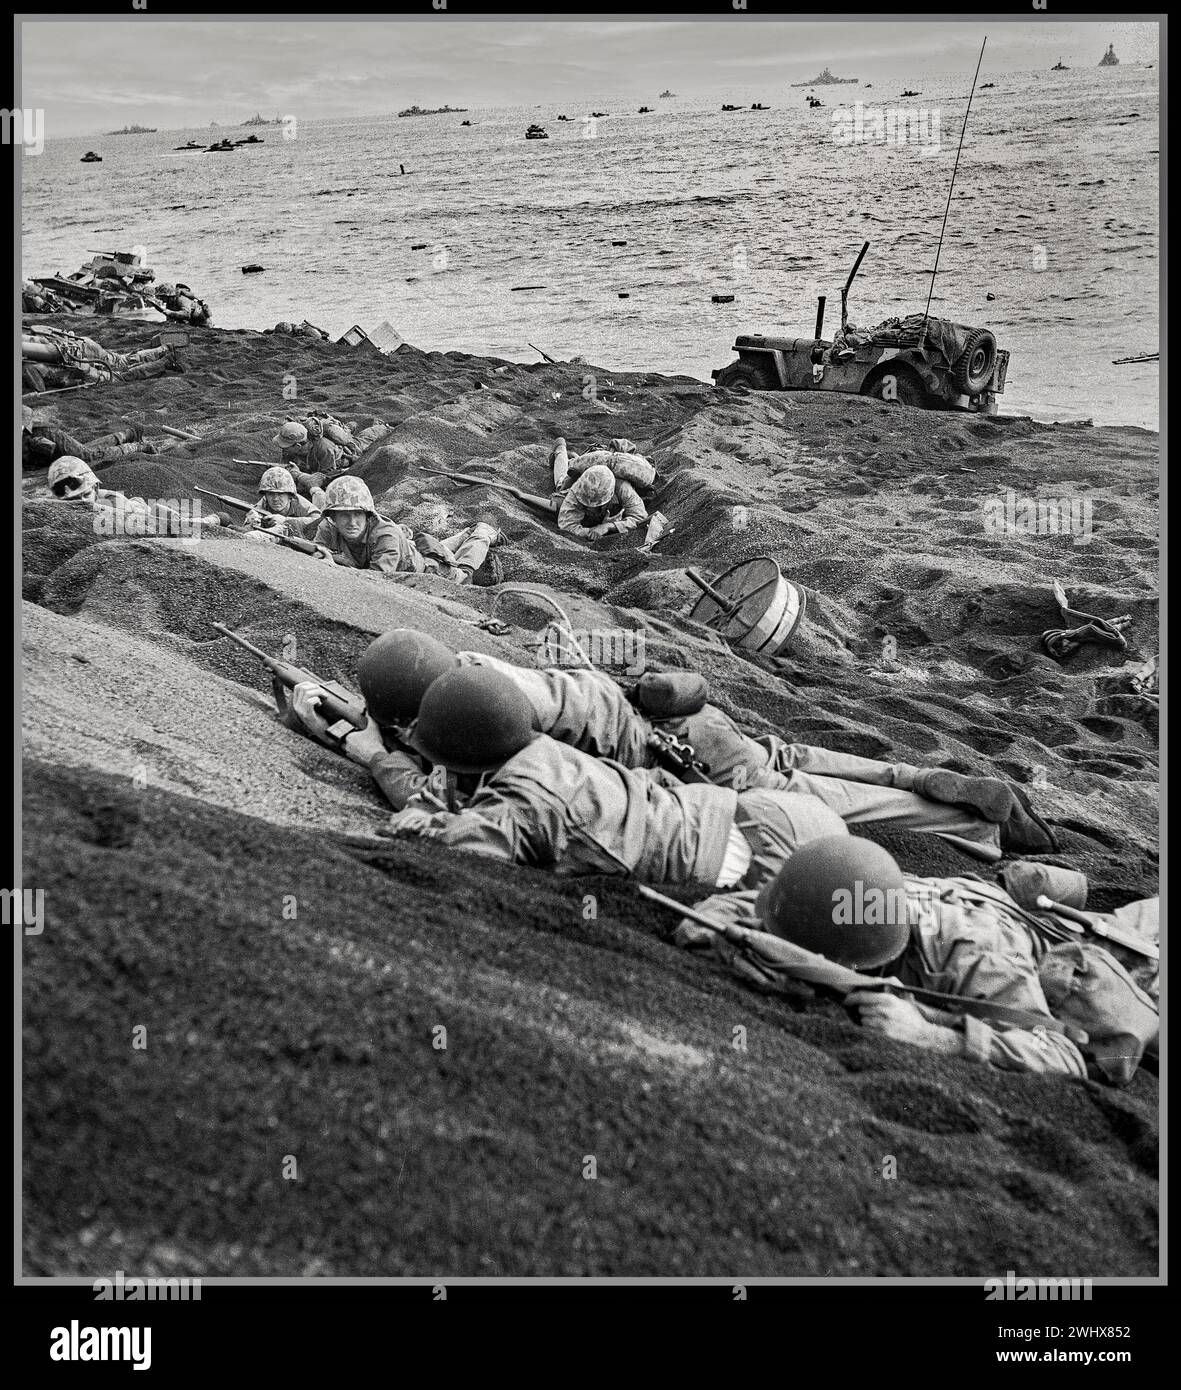 WW2 Battle of Iwo Jima. American Marines take cover under heavy fire from Imperial Japan Forces on the beach. The Battle of Iwo Jima was a major battle in which the United States Marine Corps and United States Navy landed on and eventually captured the island of Iwo Jima from the Imperial Japanese Army during World War II. Stock Photo